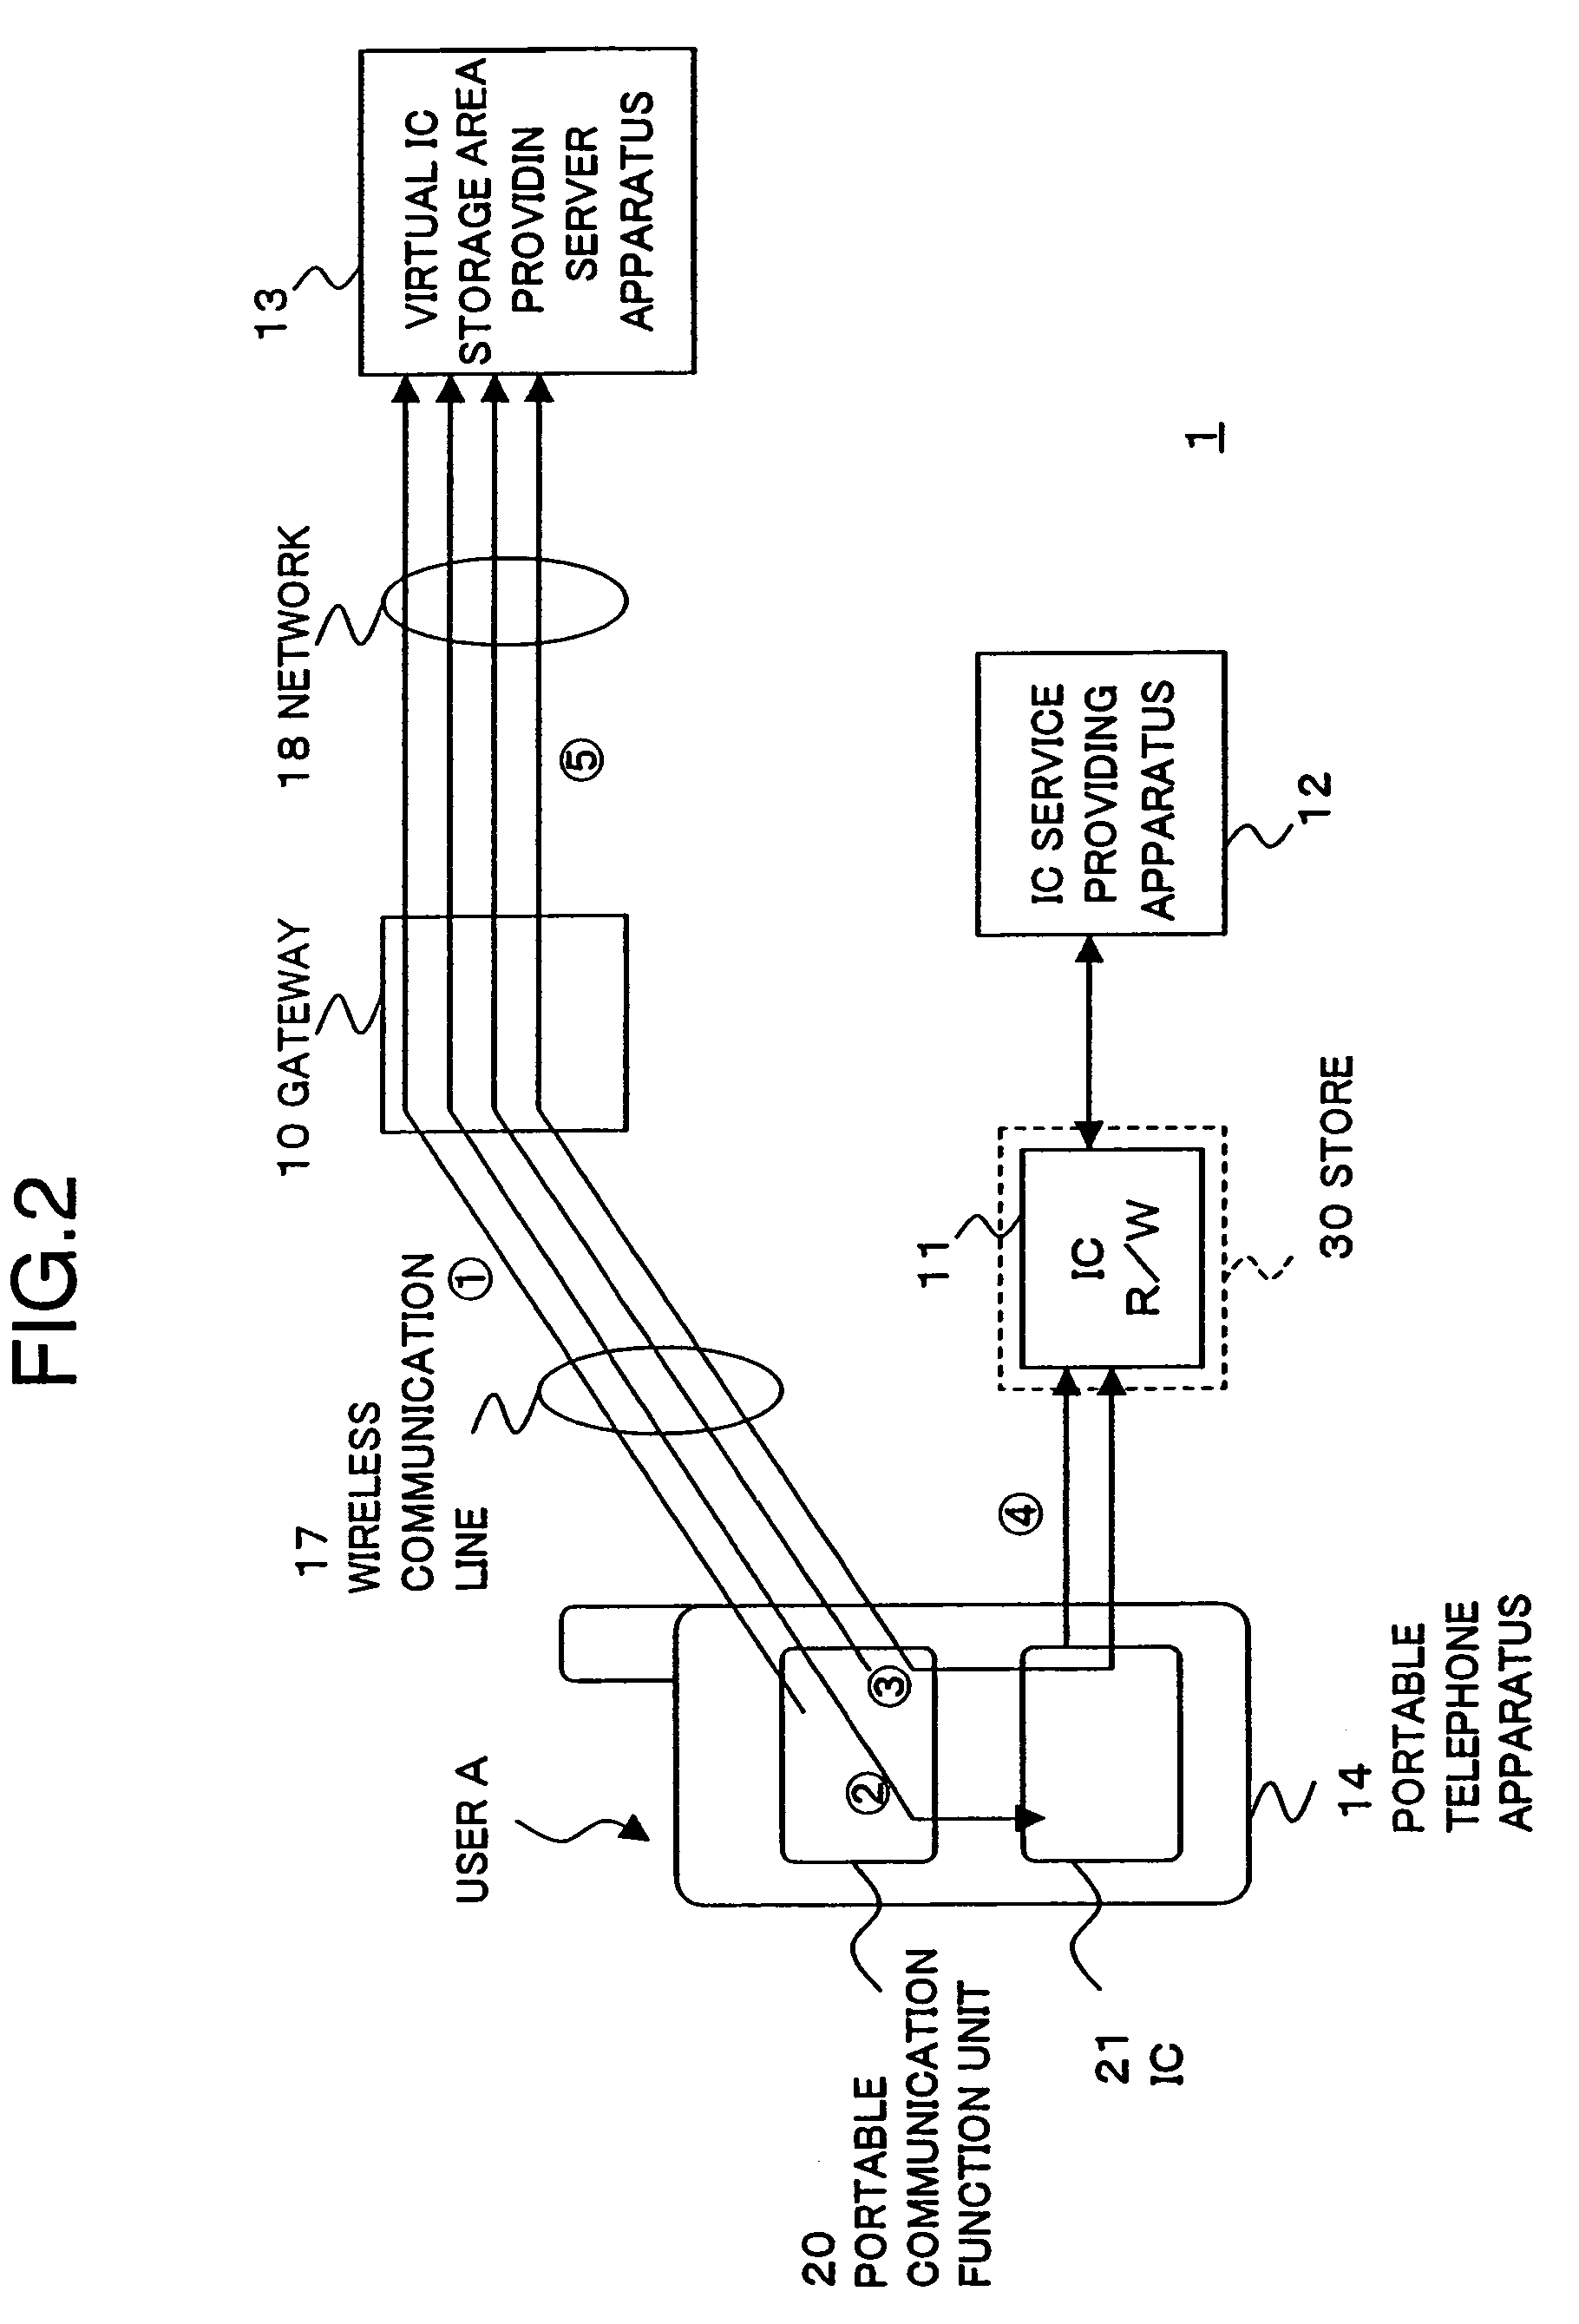 Service providing method and integrated circuit